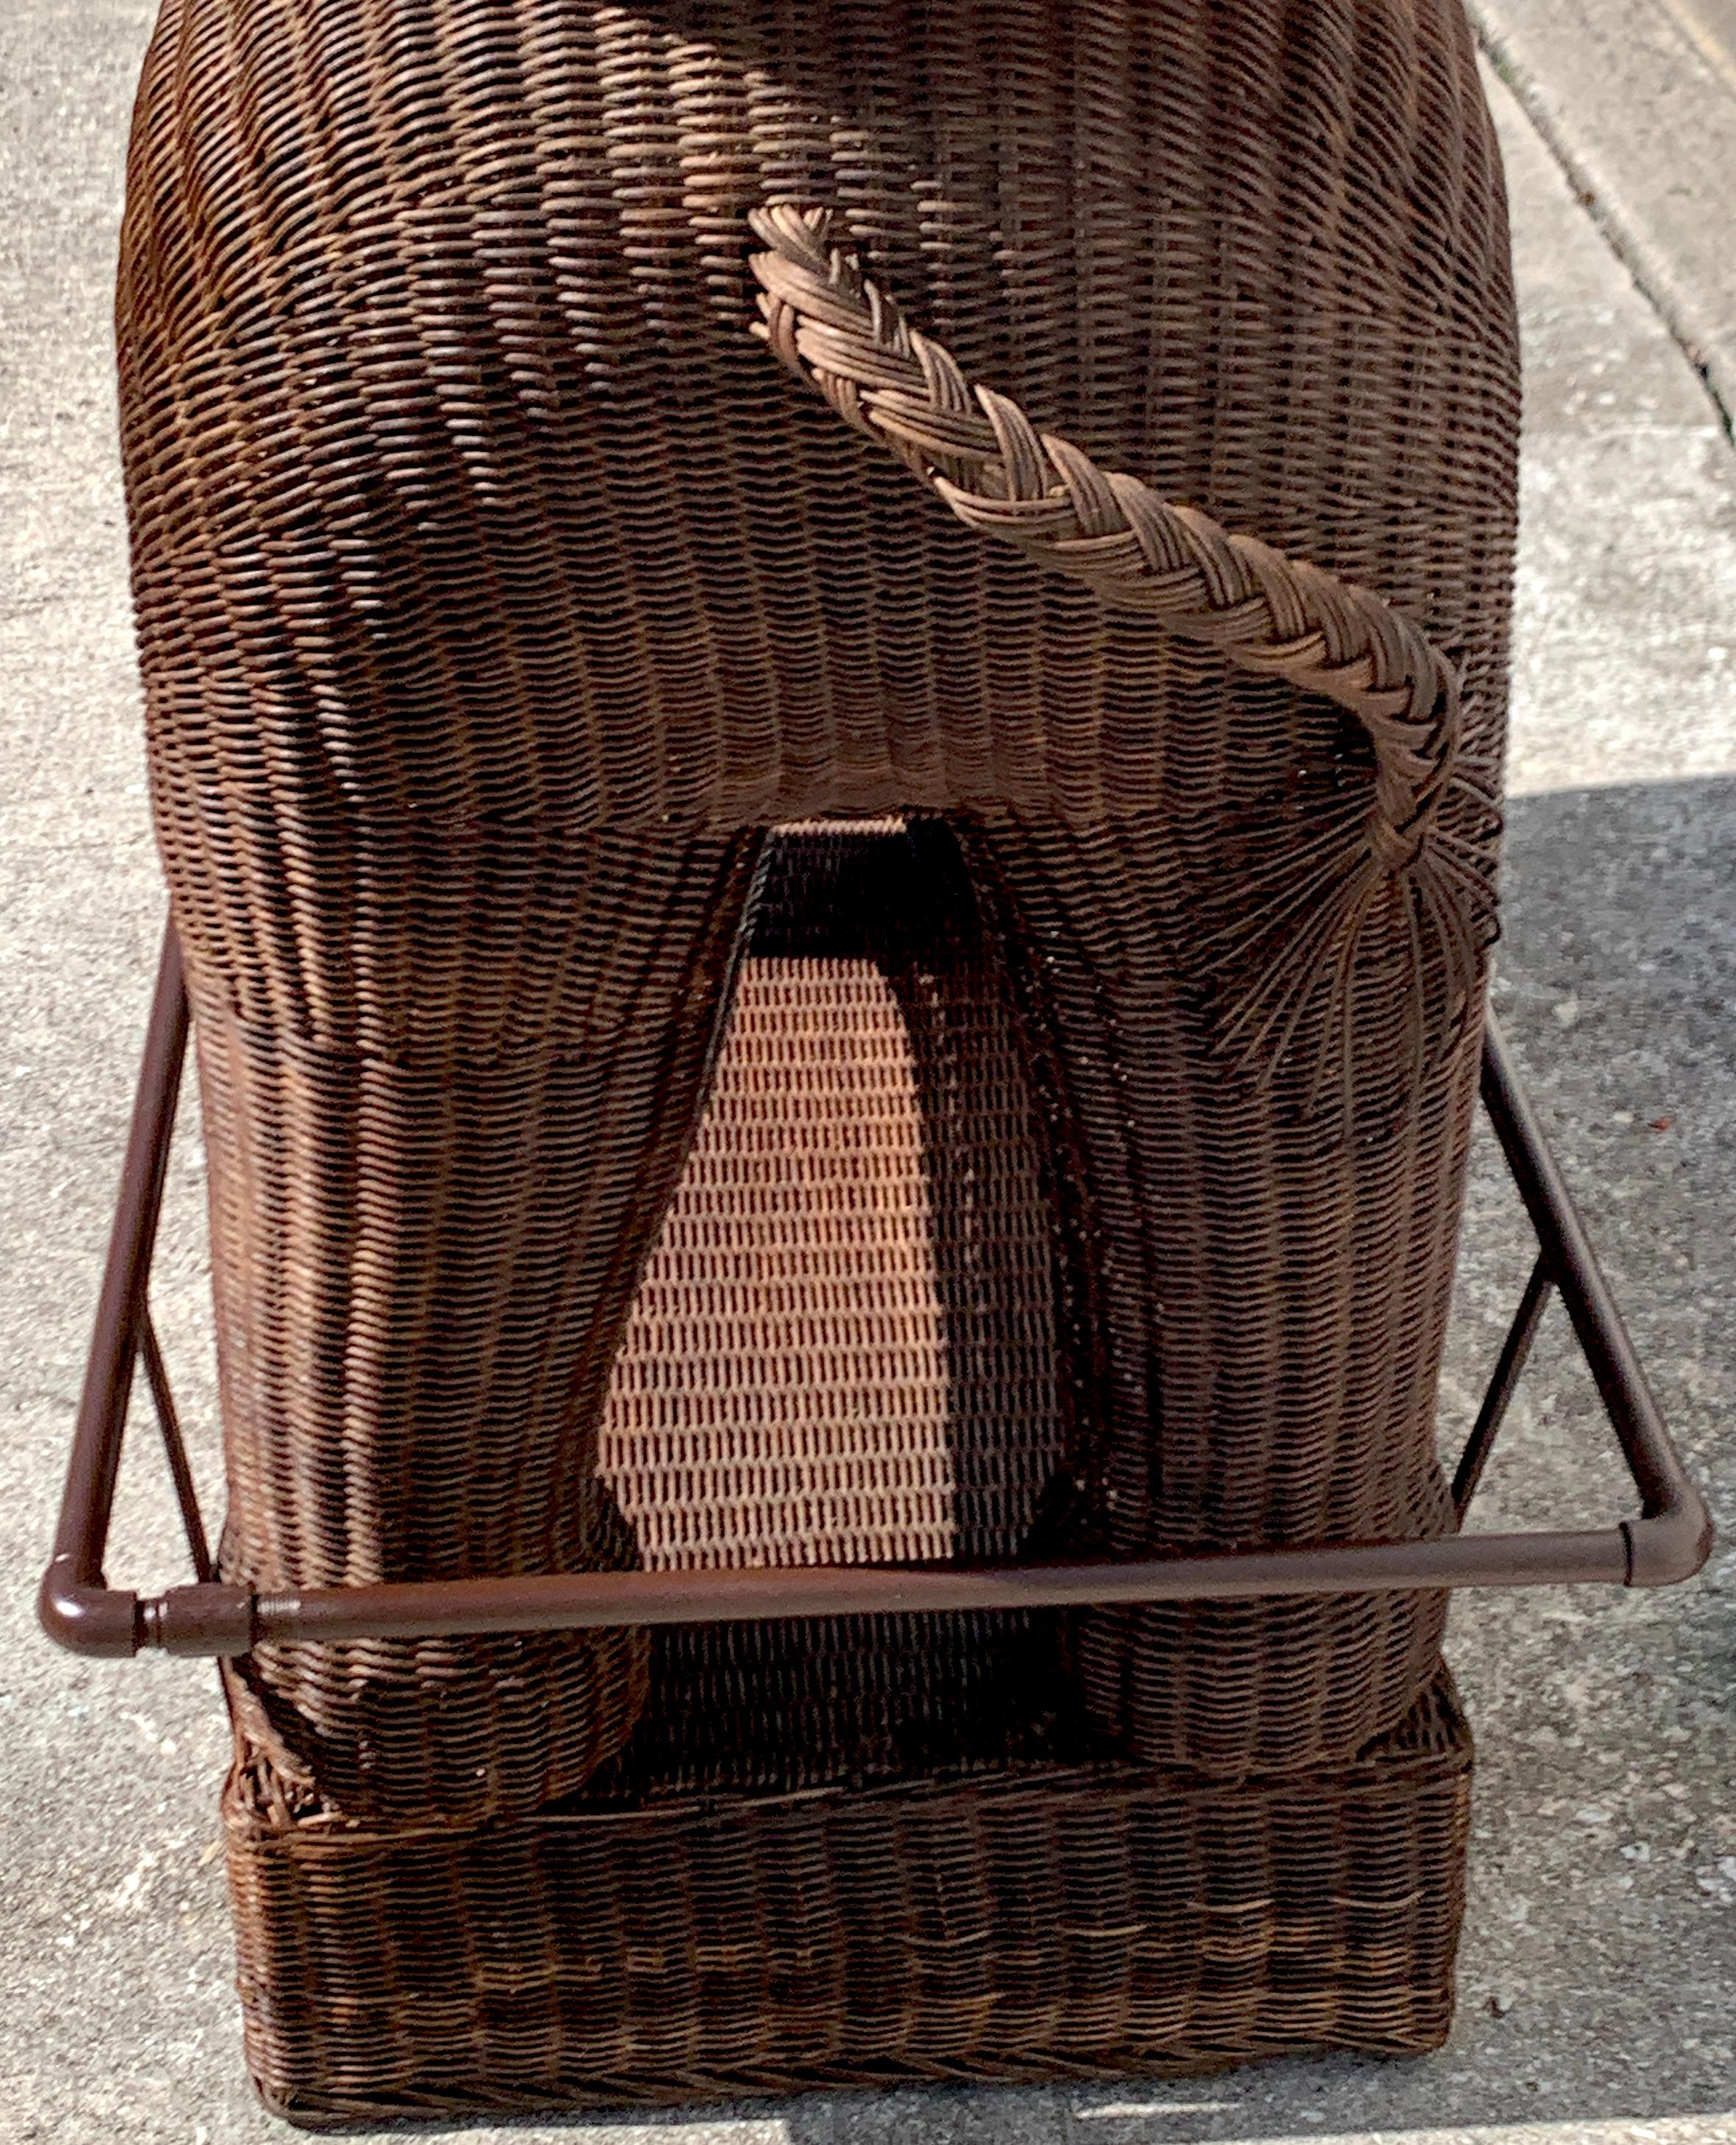 1960s Chinese Export Wicker Elephant Dry Bar 5